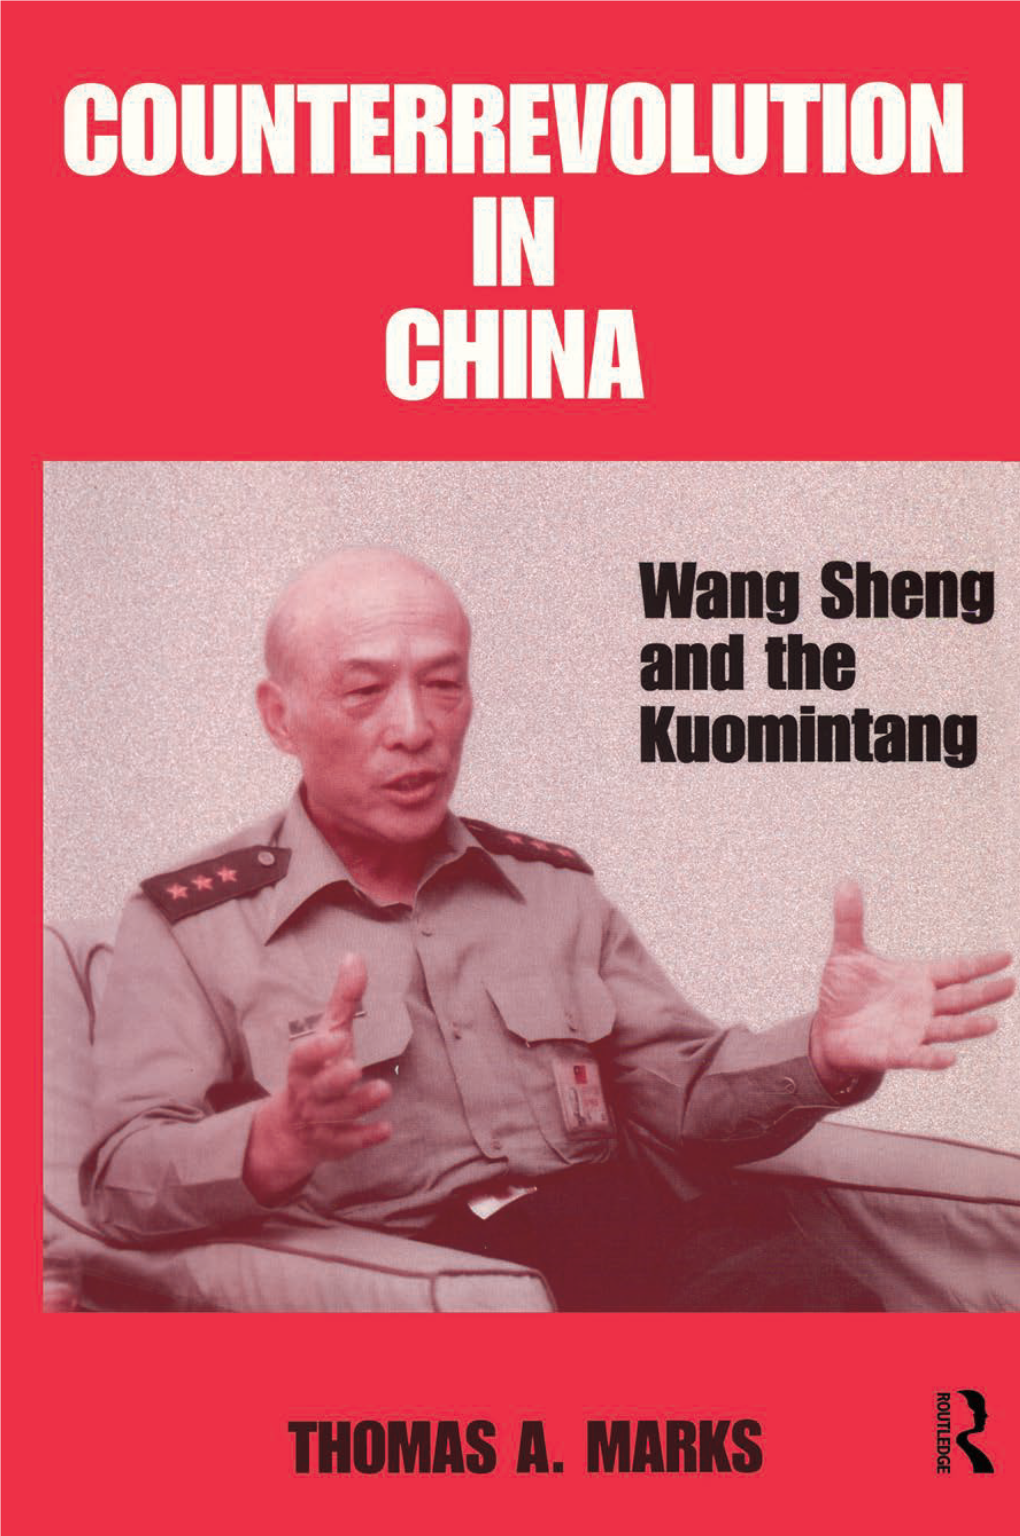 COUNTERREVOLUTION in CHINA Wang Sheng and the Kuomintang